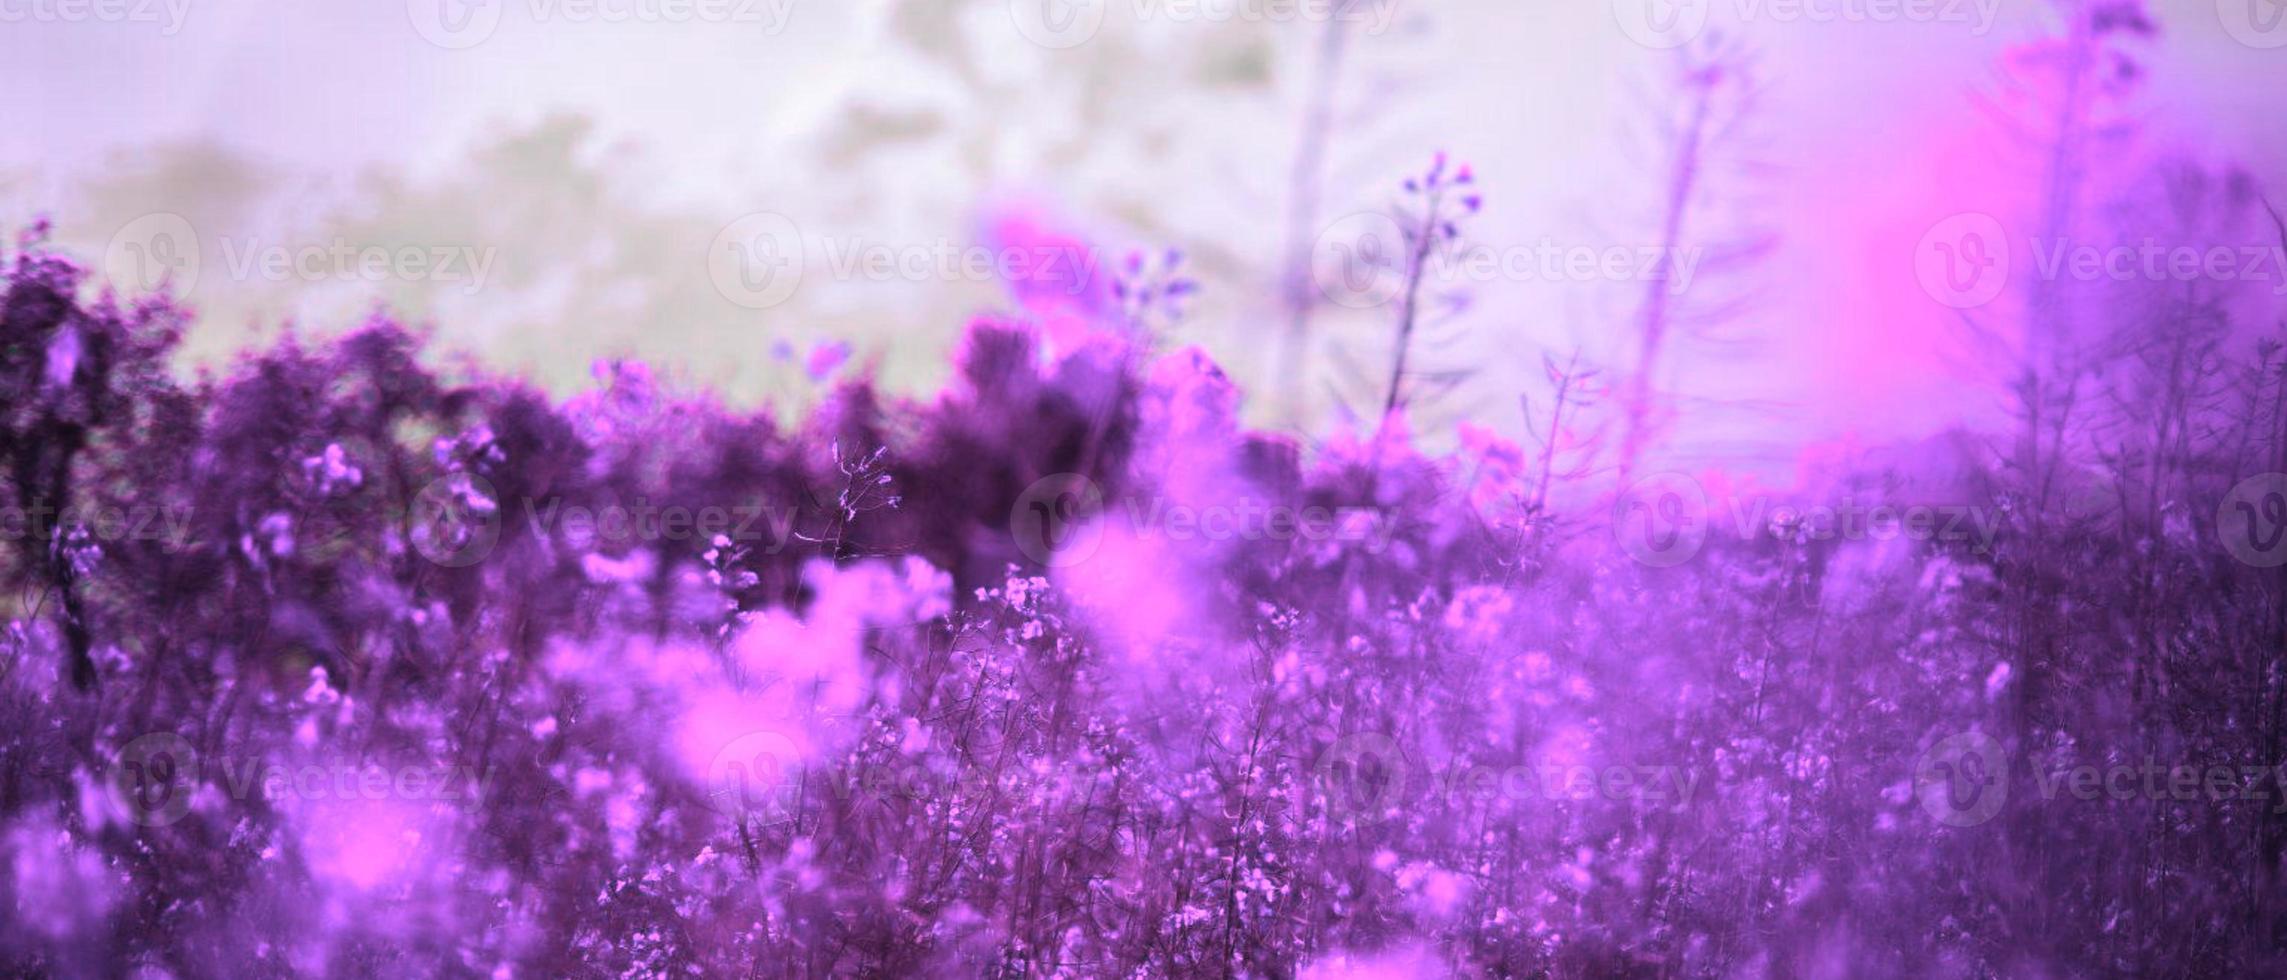 A purple flower field with trees in the background - Computer